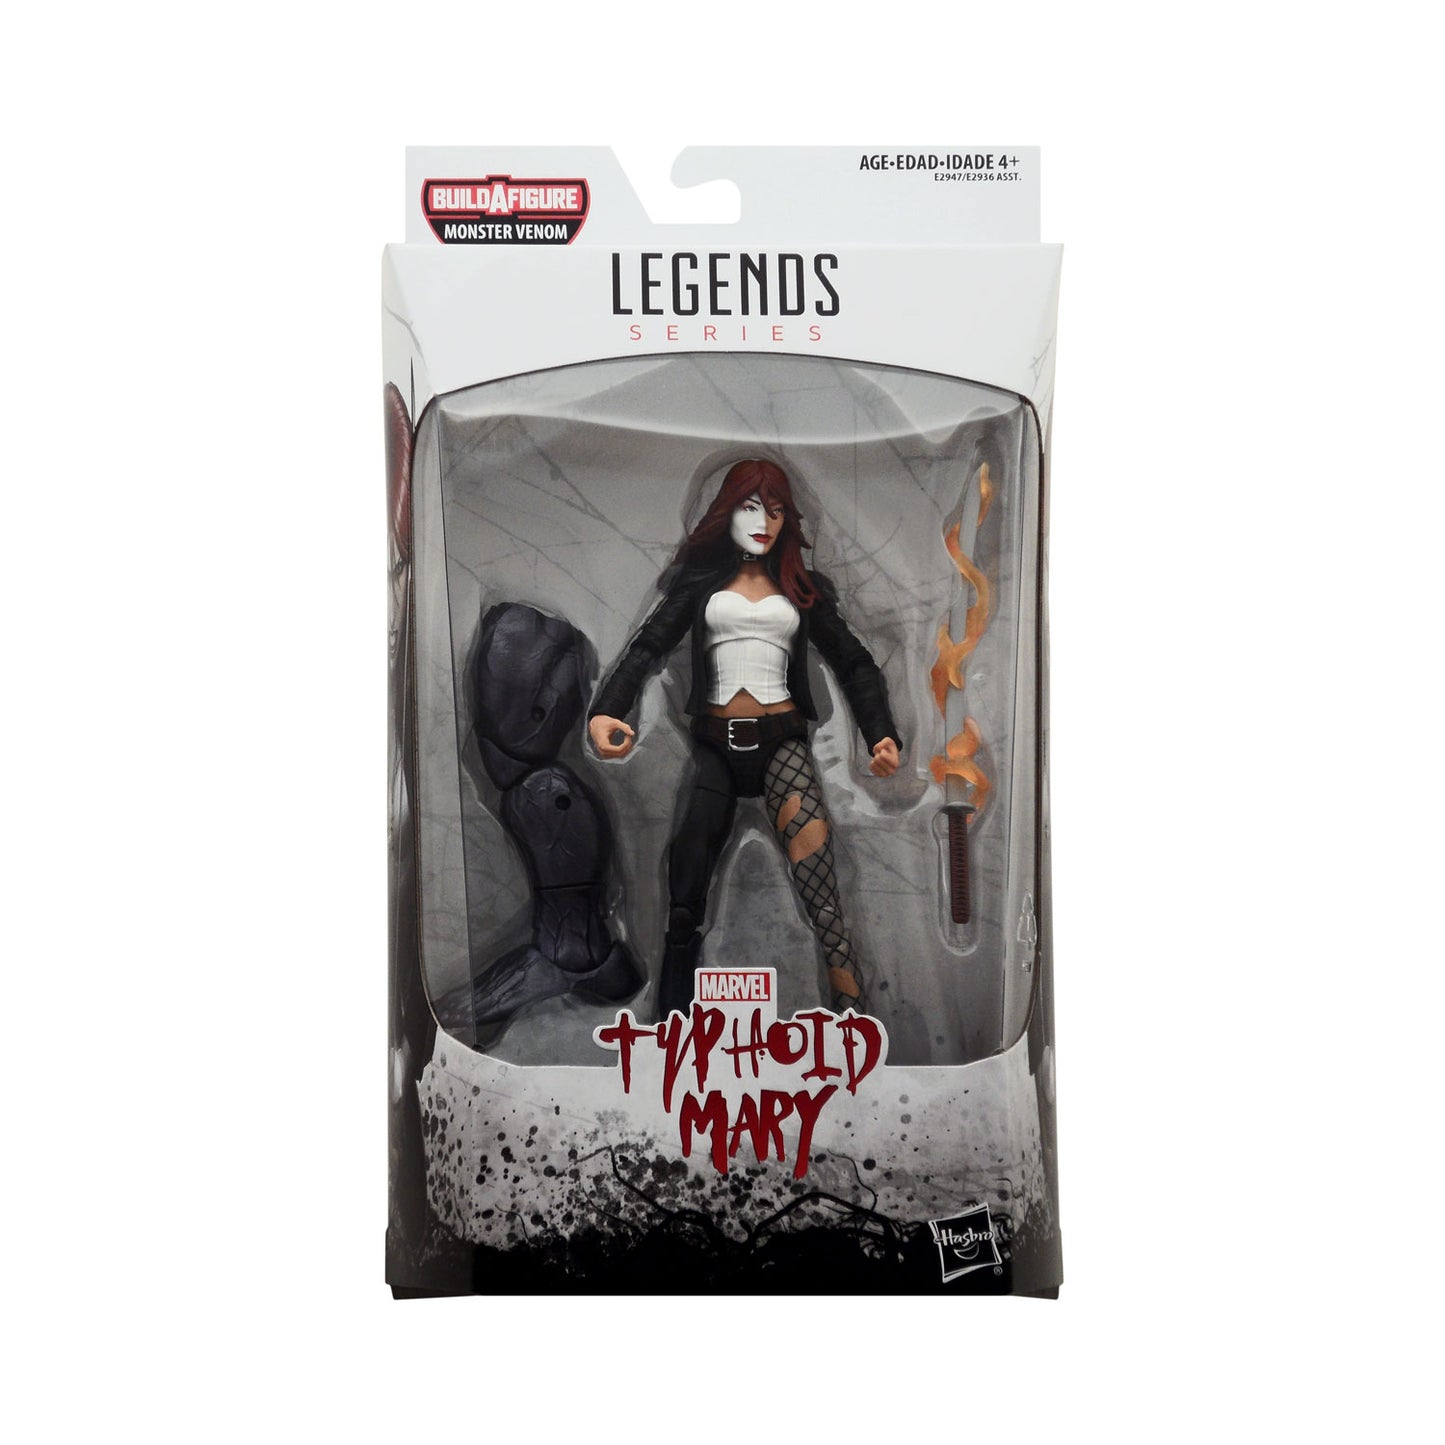 Marvel Legends Monster Venom Series Venom 6-Inch Action Figure – Action  Figures and Collectible Toys